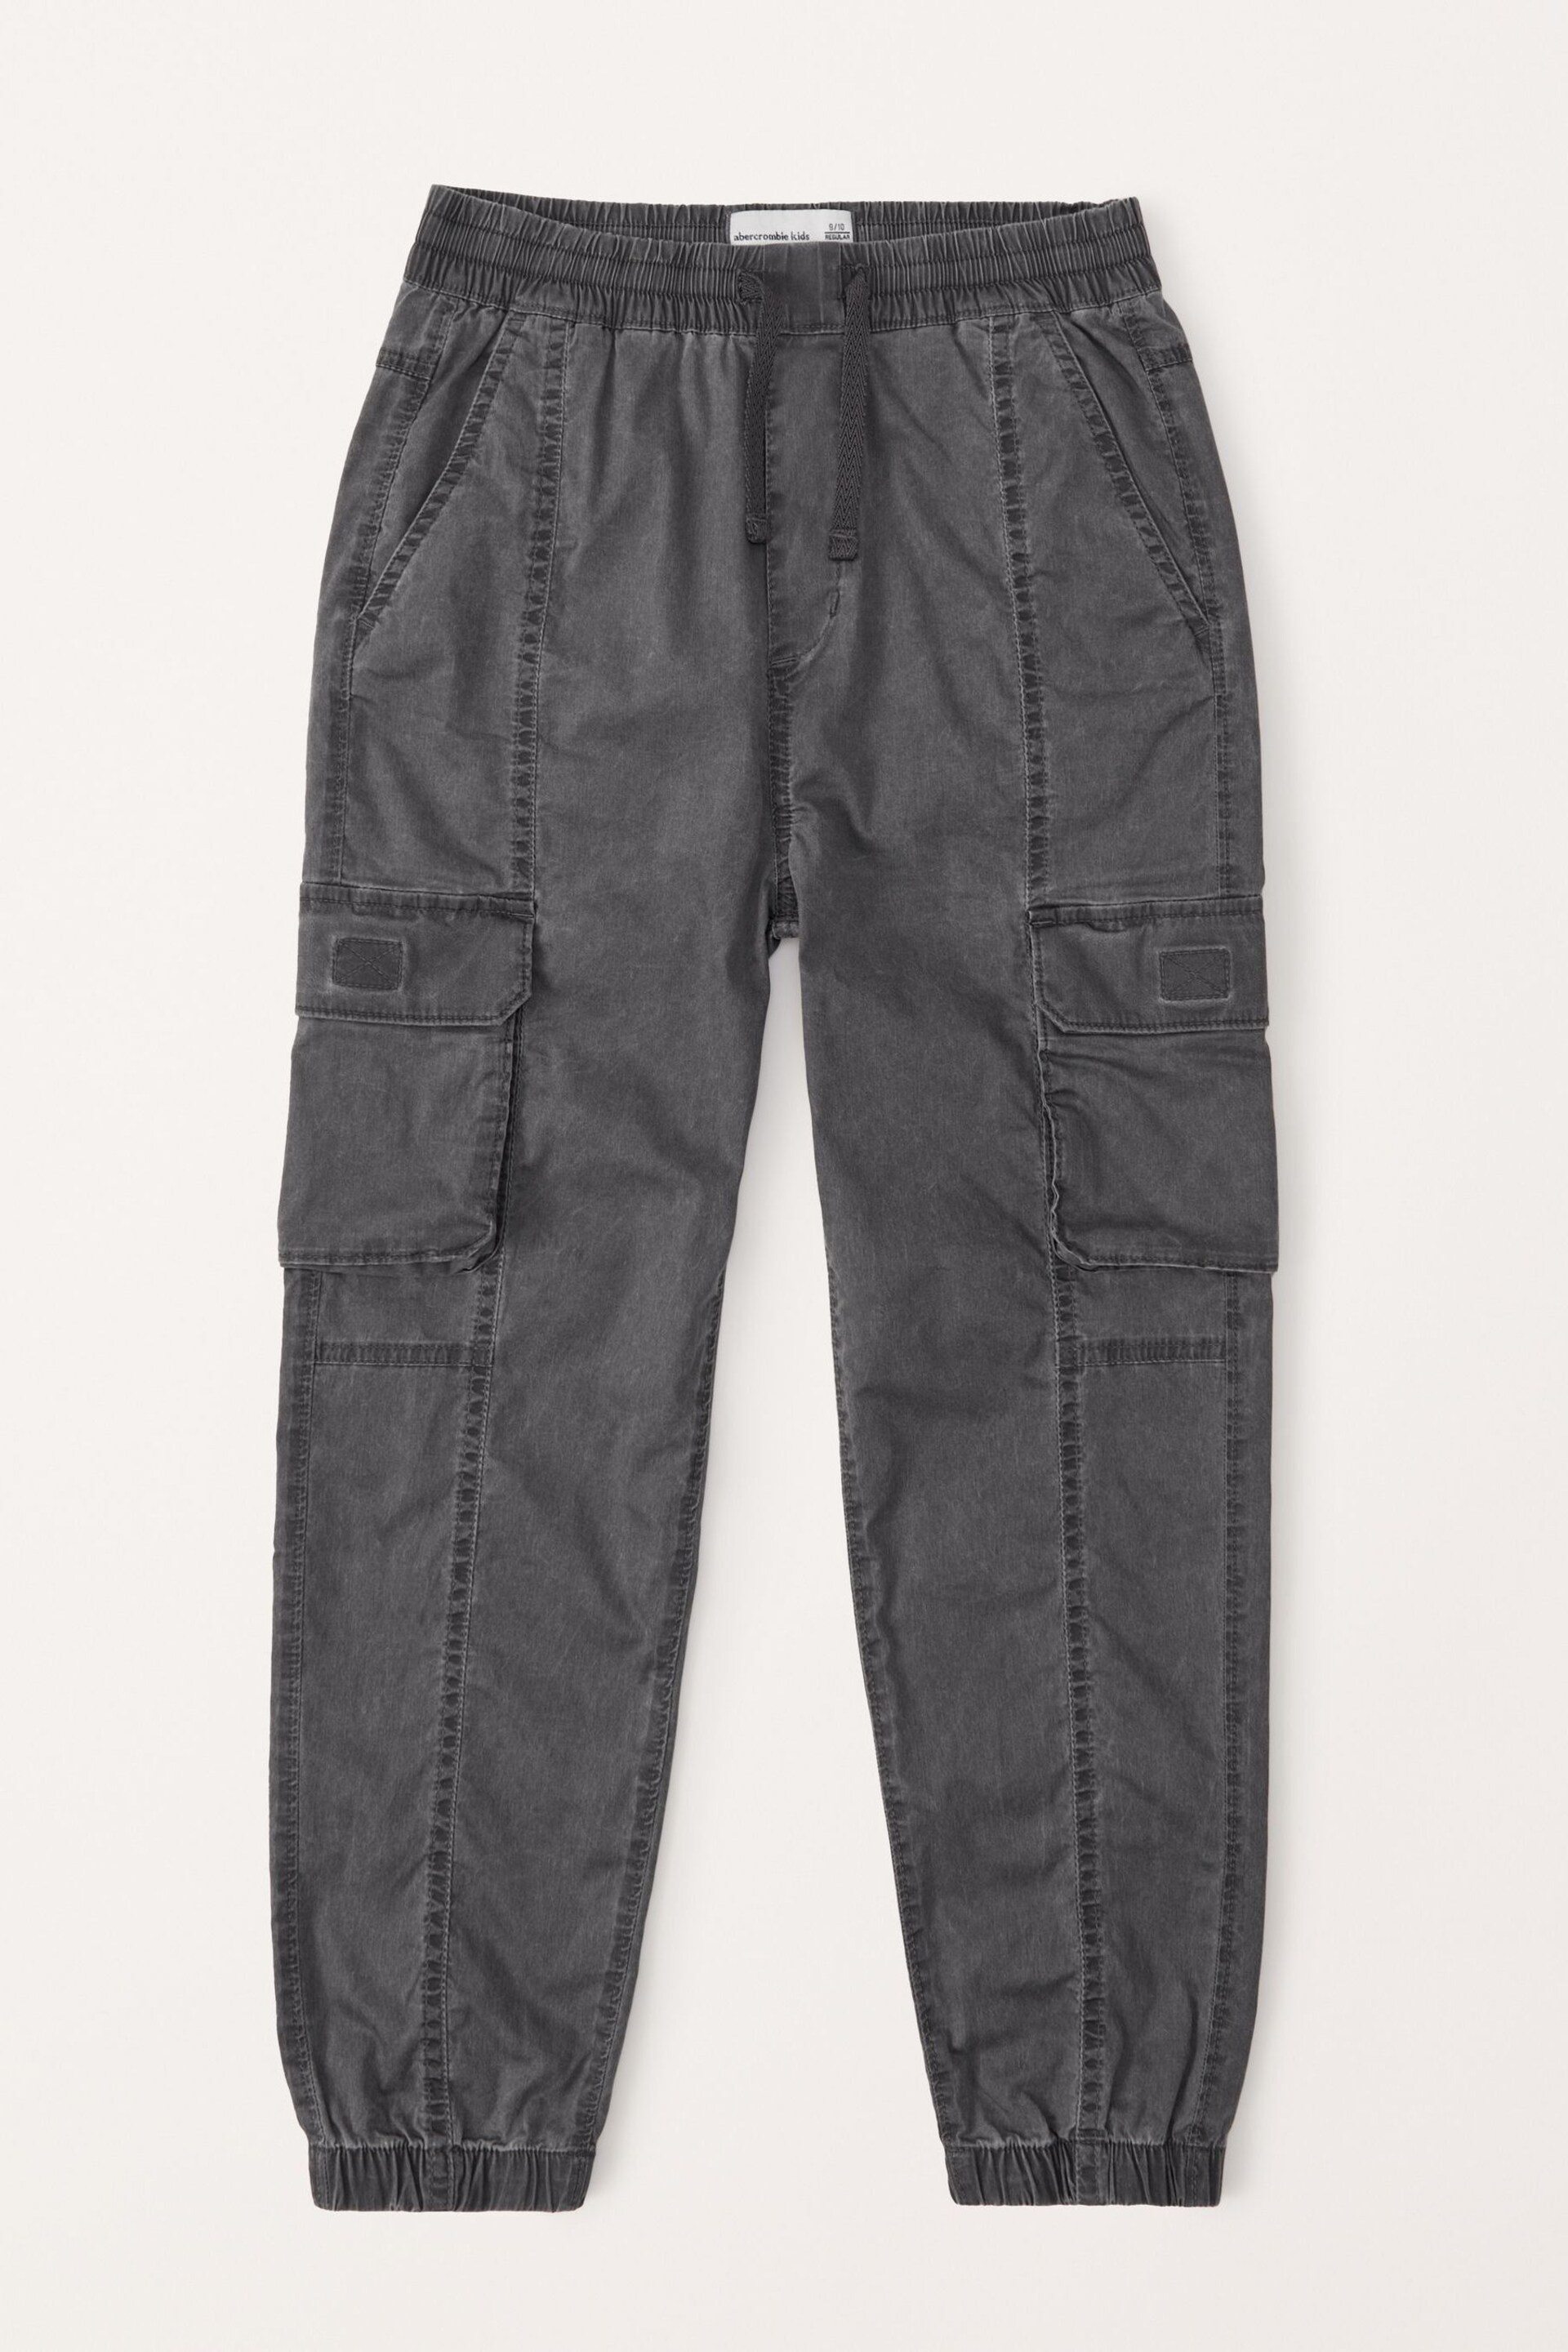 Abercrombie & Fitch Utility Cargo Black Trousers - Image 1 of 6